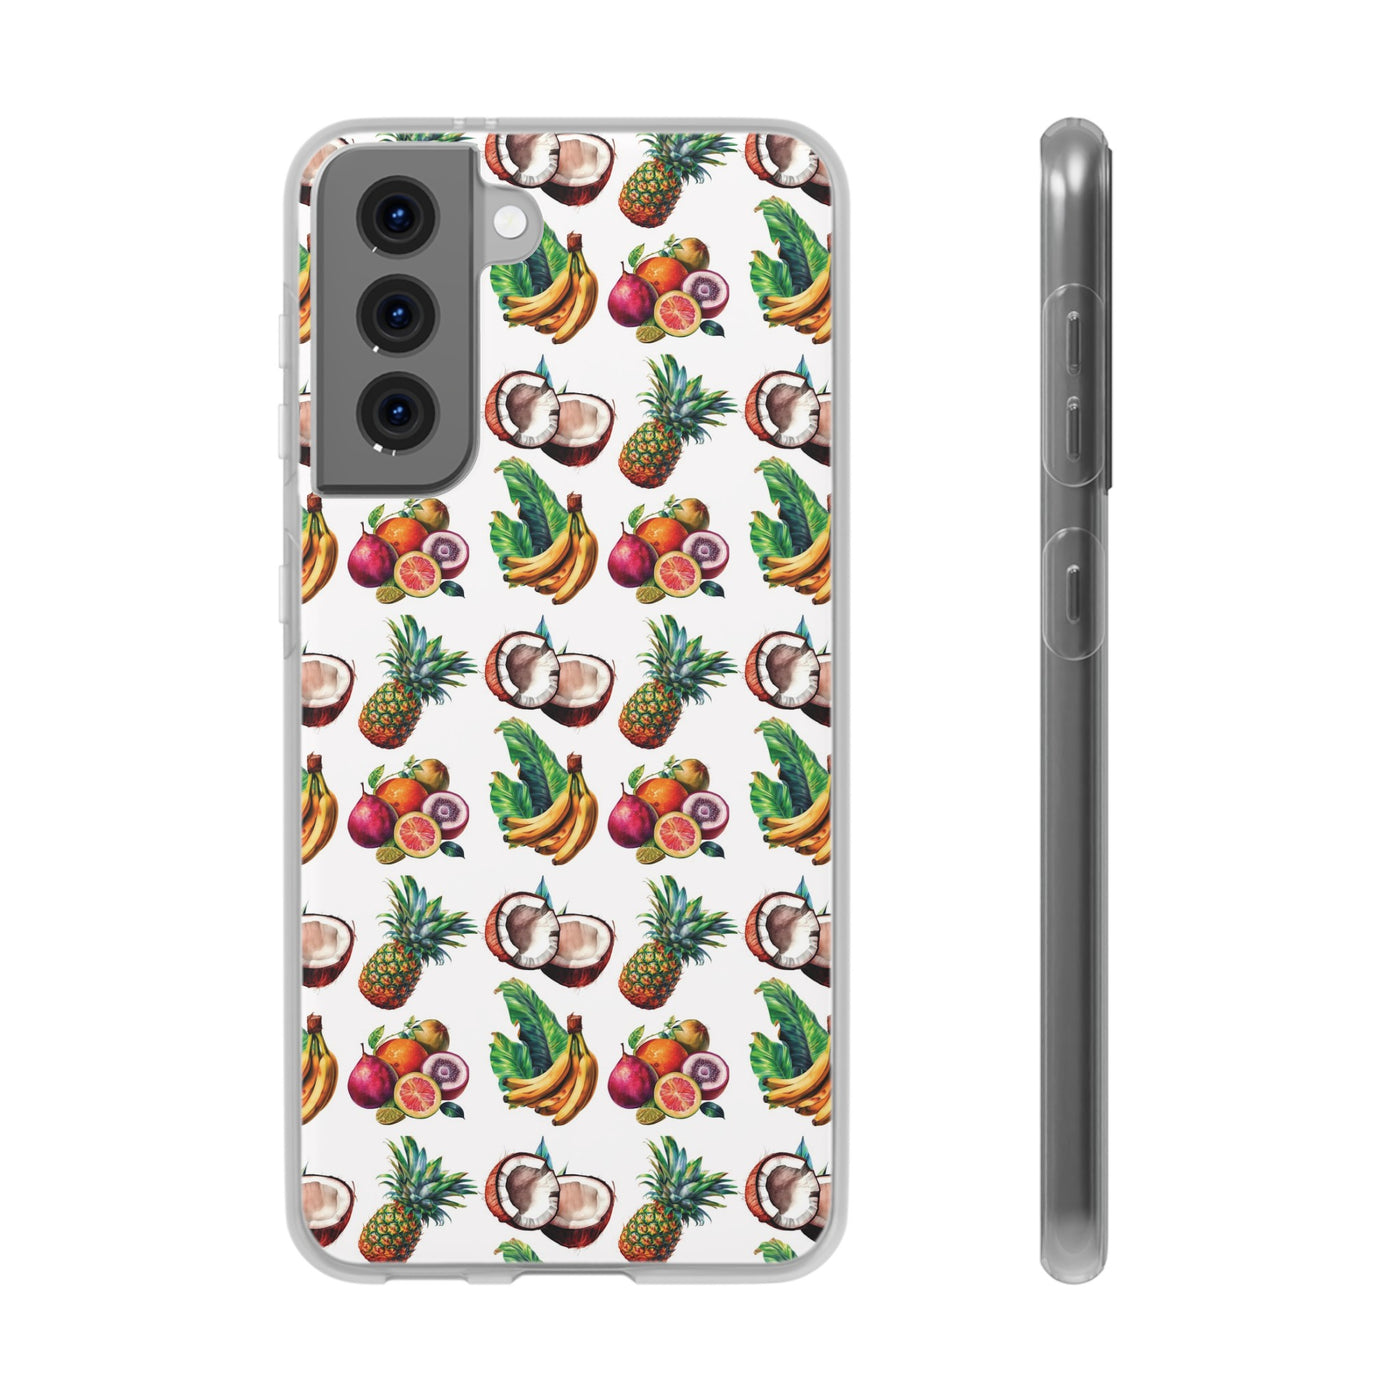 Cute Flexi Phone Cases, For Iphones and Samsung Galaxy Phones, Tropical Summer Fruit, Galaxy S23 Phone Case, Samsung S22 Case, Samsung S21, Iphone 15, Iphone 14, Iphone 13